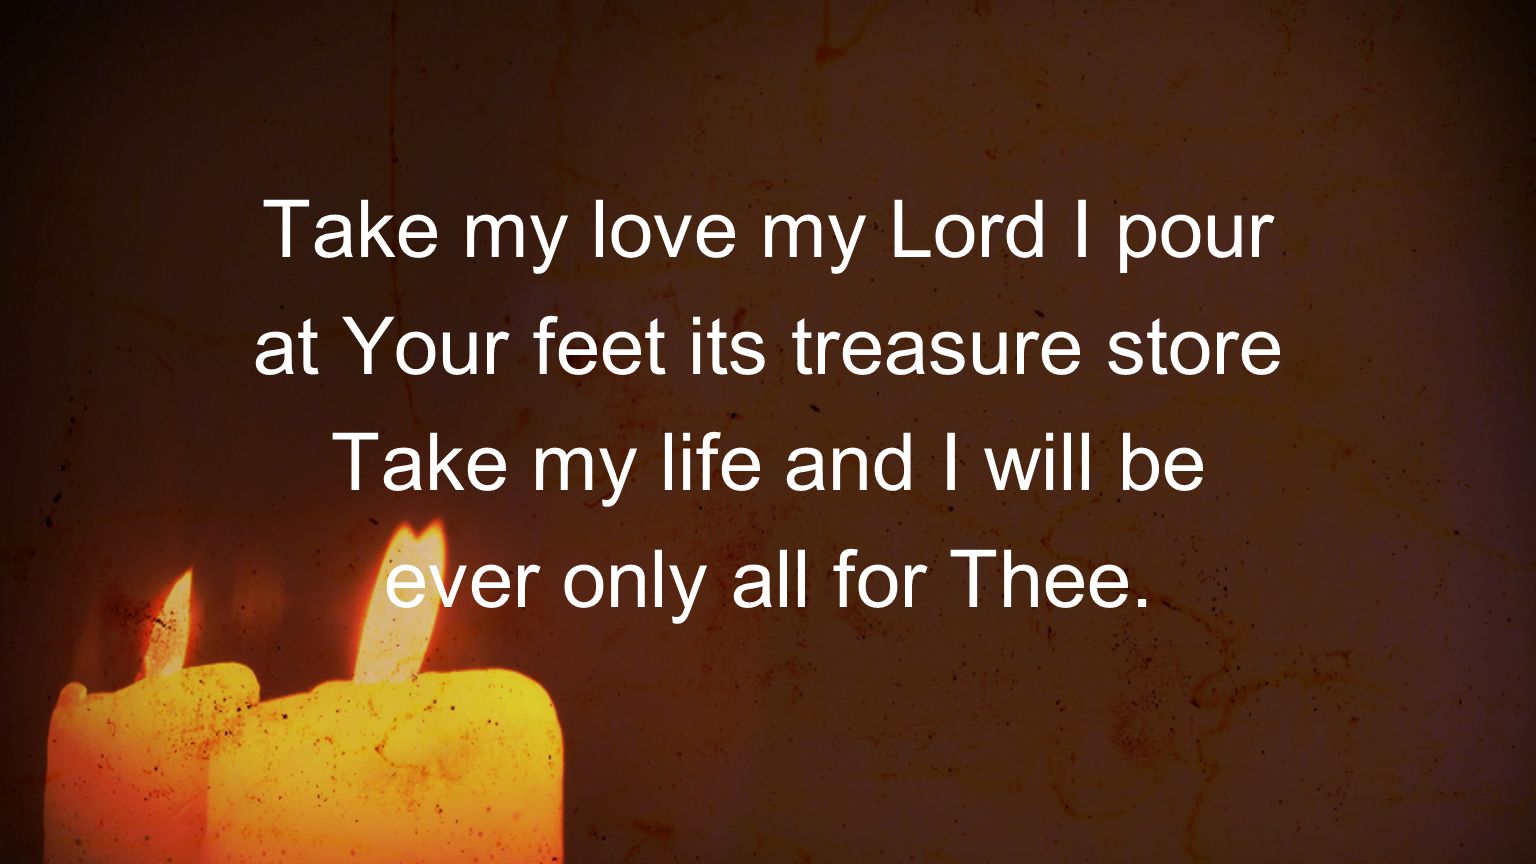 Take my love my Lord I pour at Your feet its treasure store